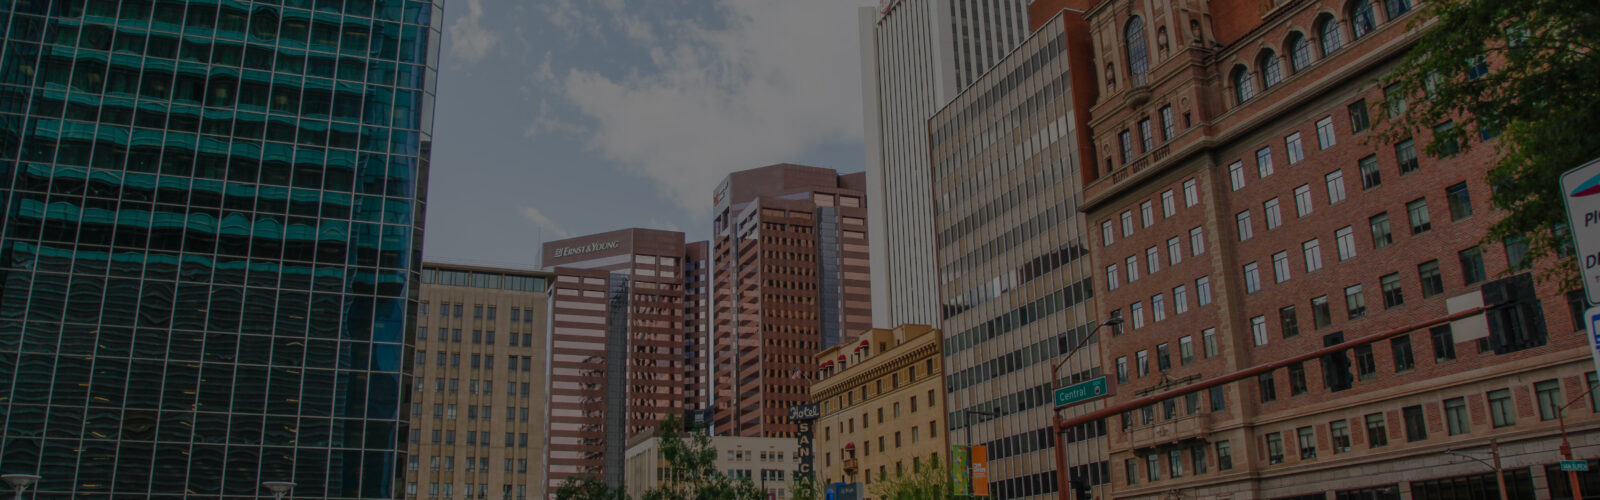 Greater Phoenix companies enjoy a business climate where they can compete and thrive in today’s global economy.